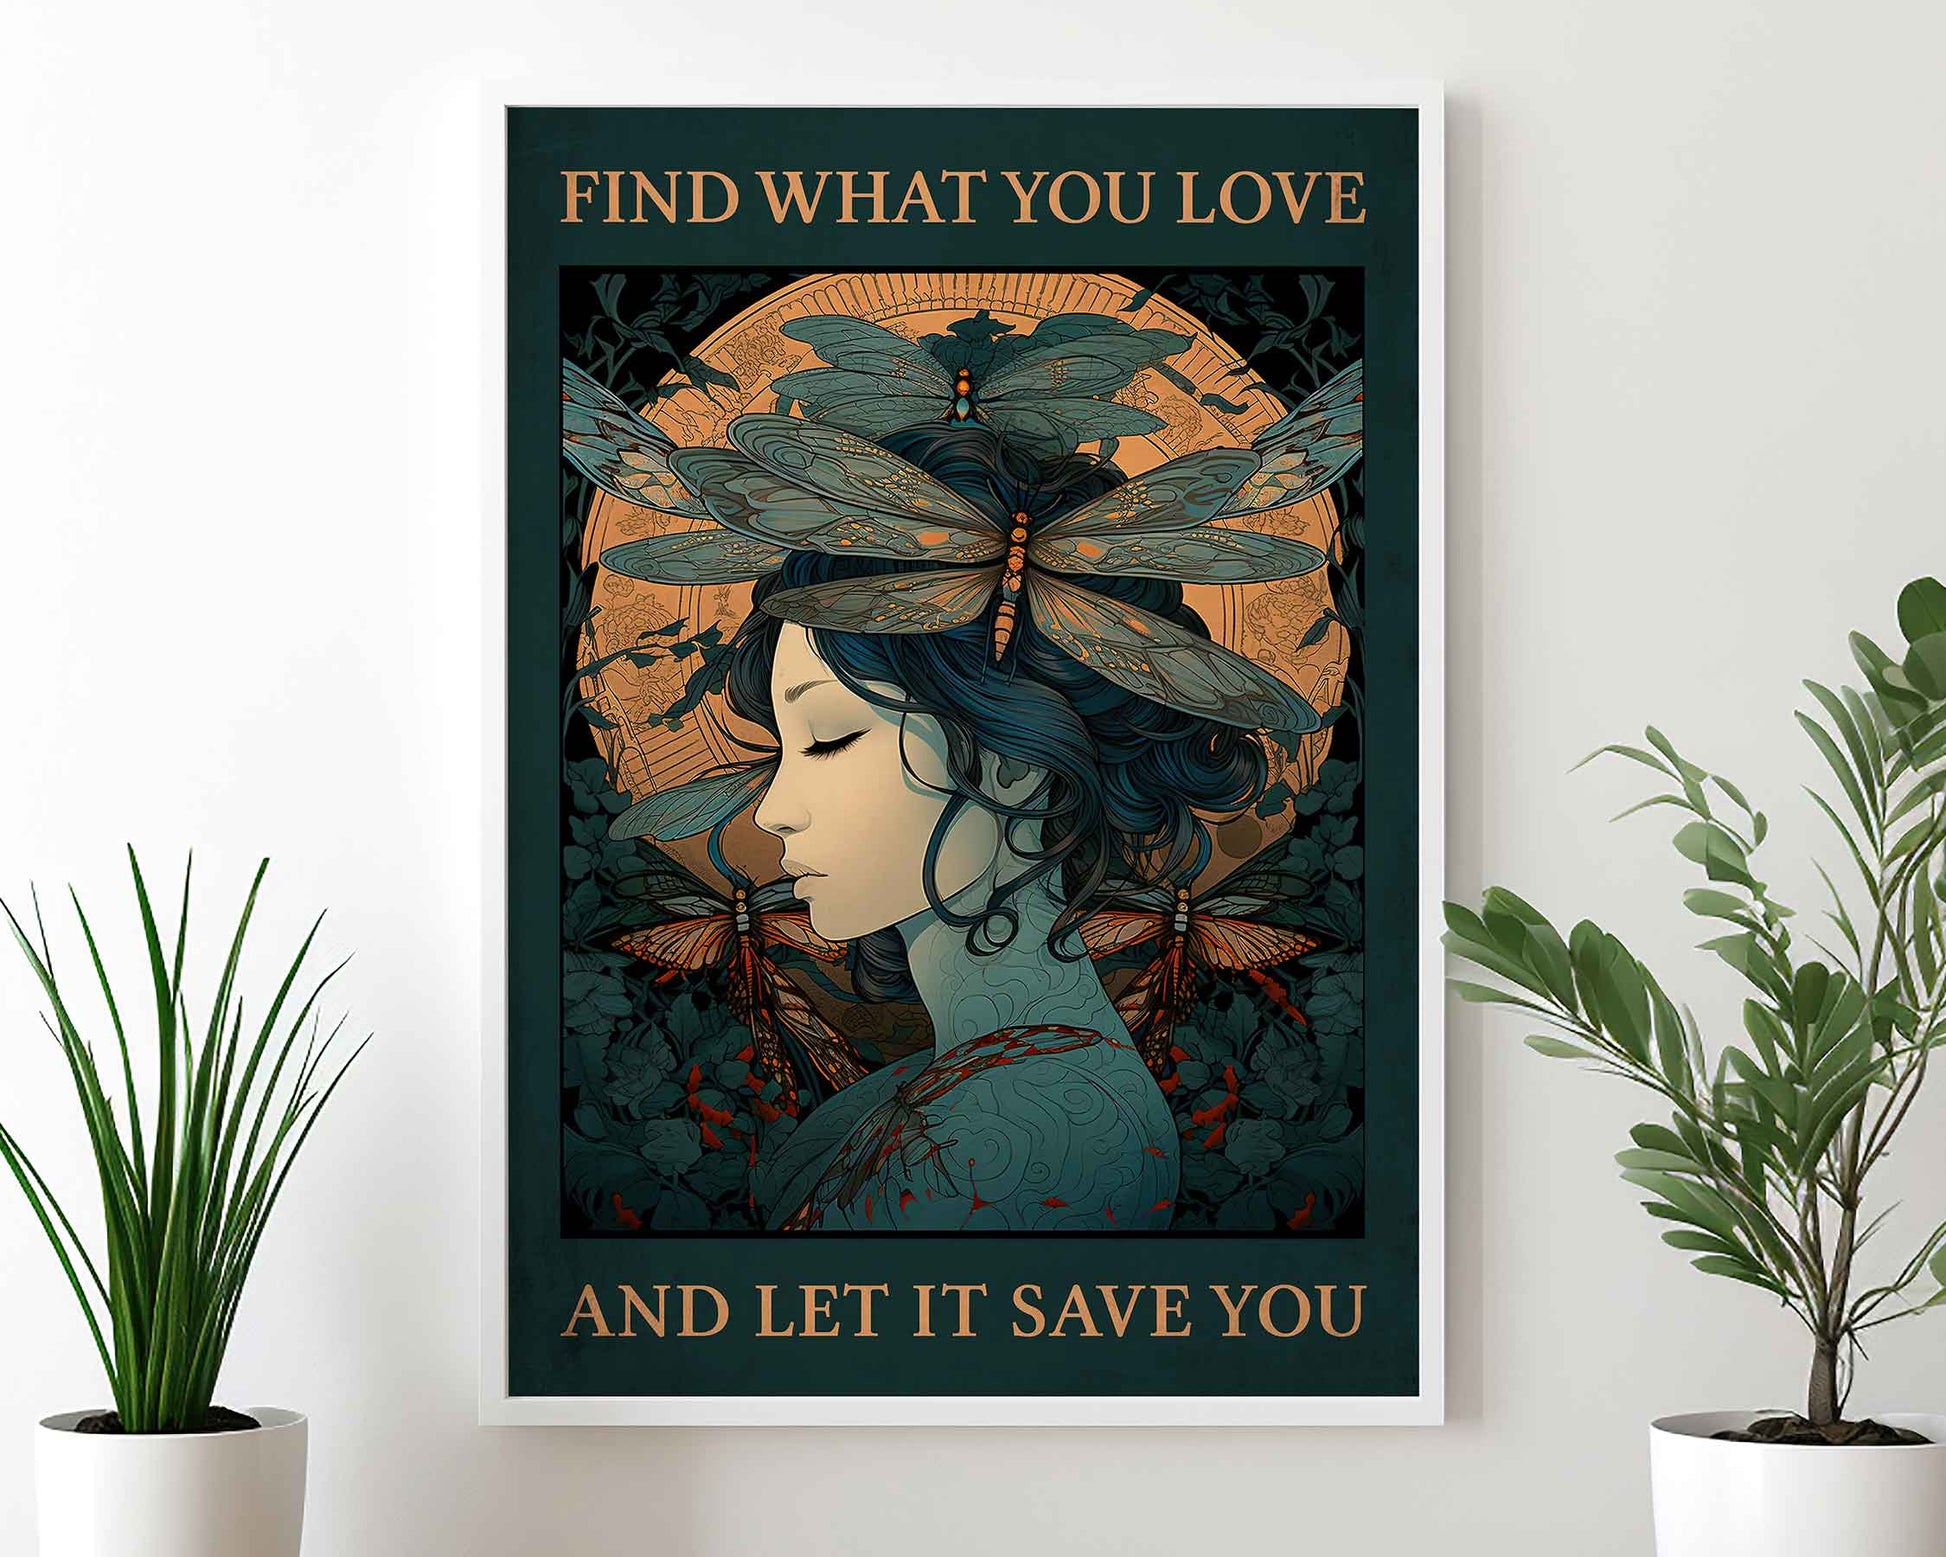 Framed Image of Vintage Art Print, Find What You Love And Let It Save You Famous Quote